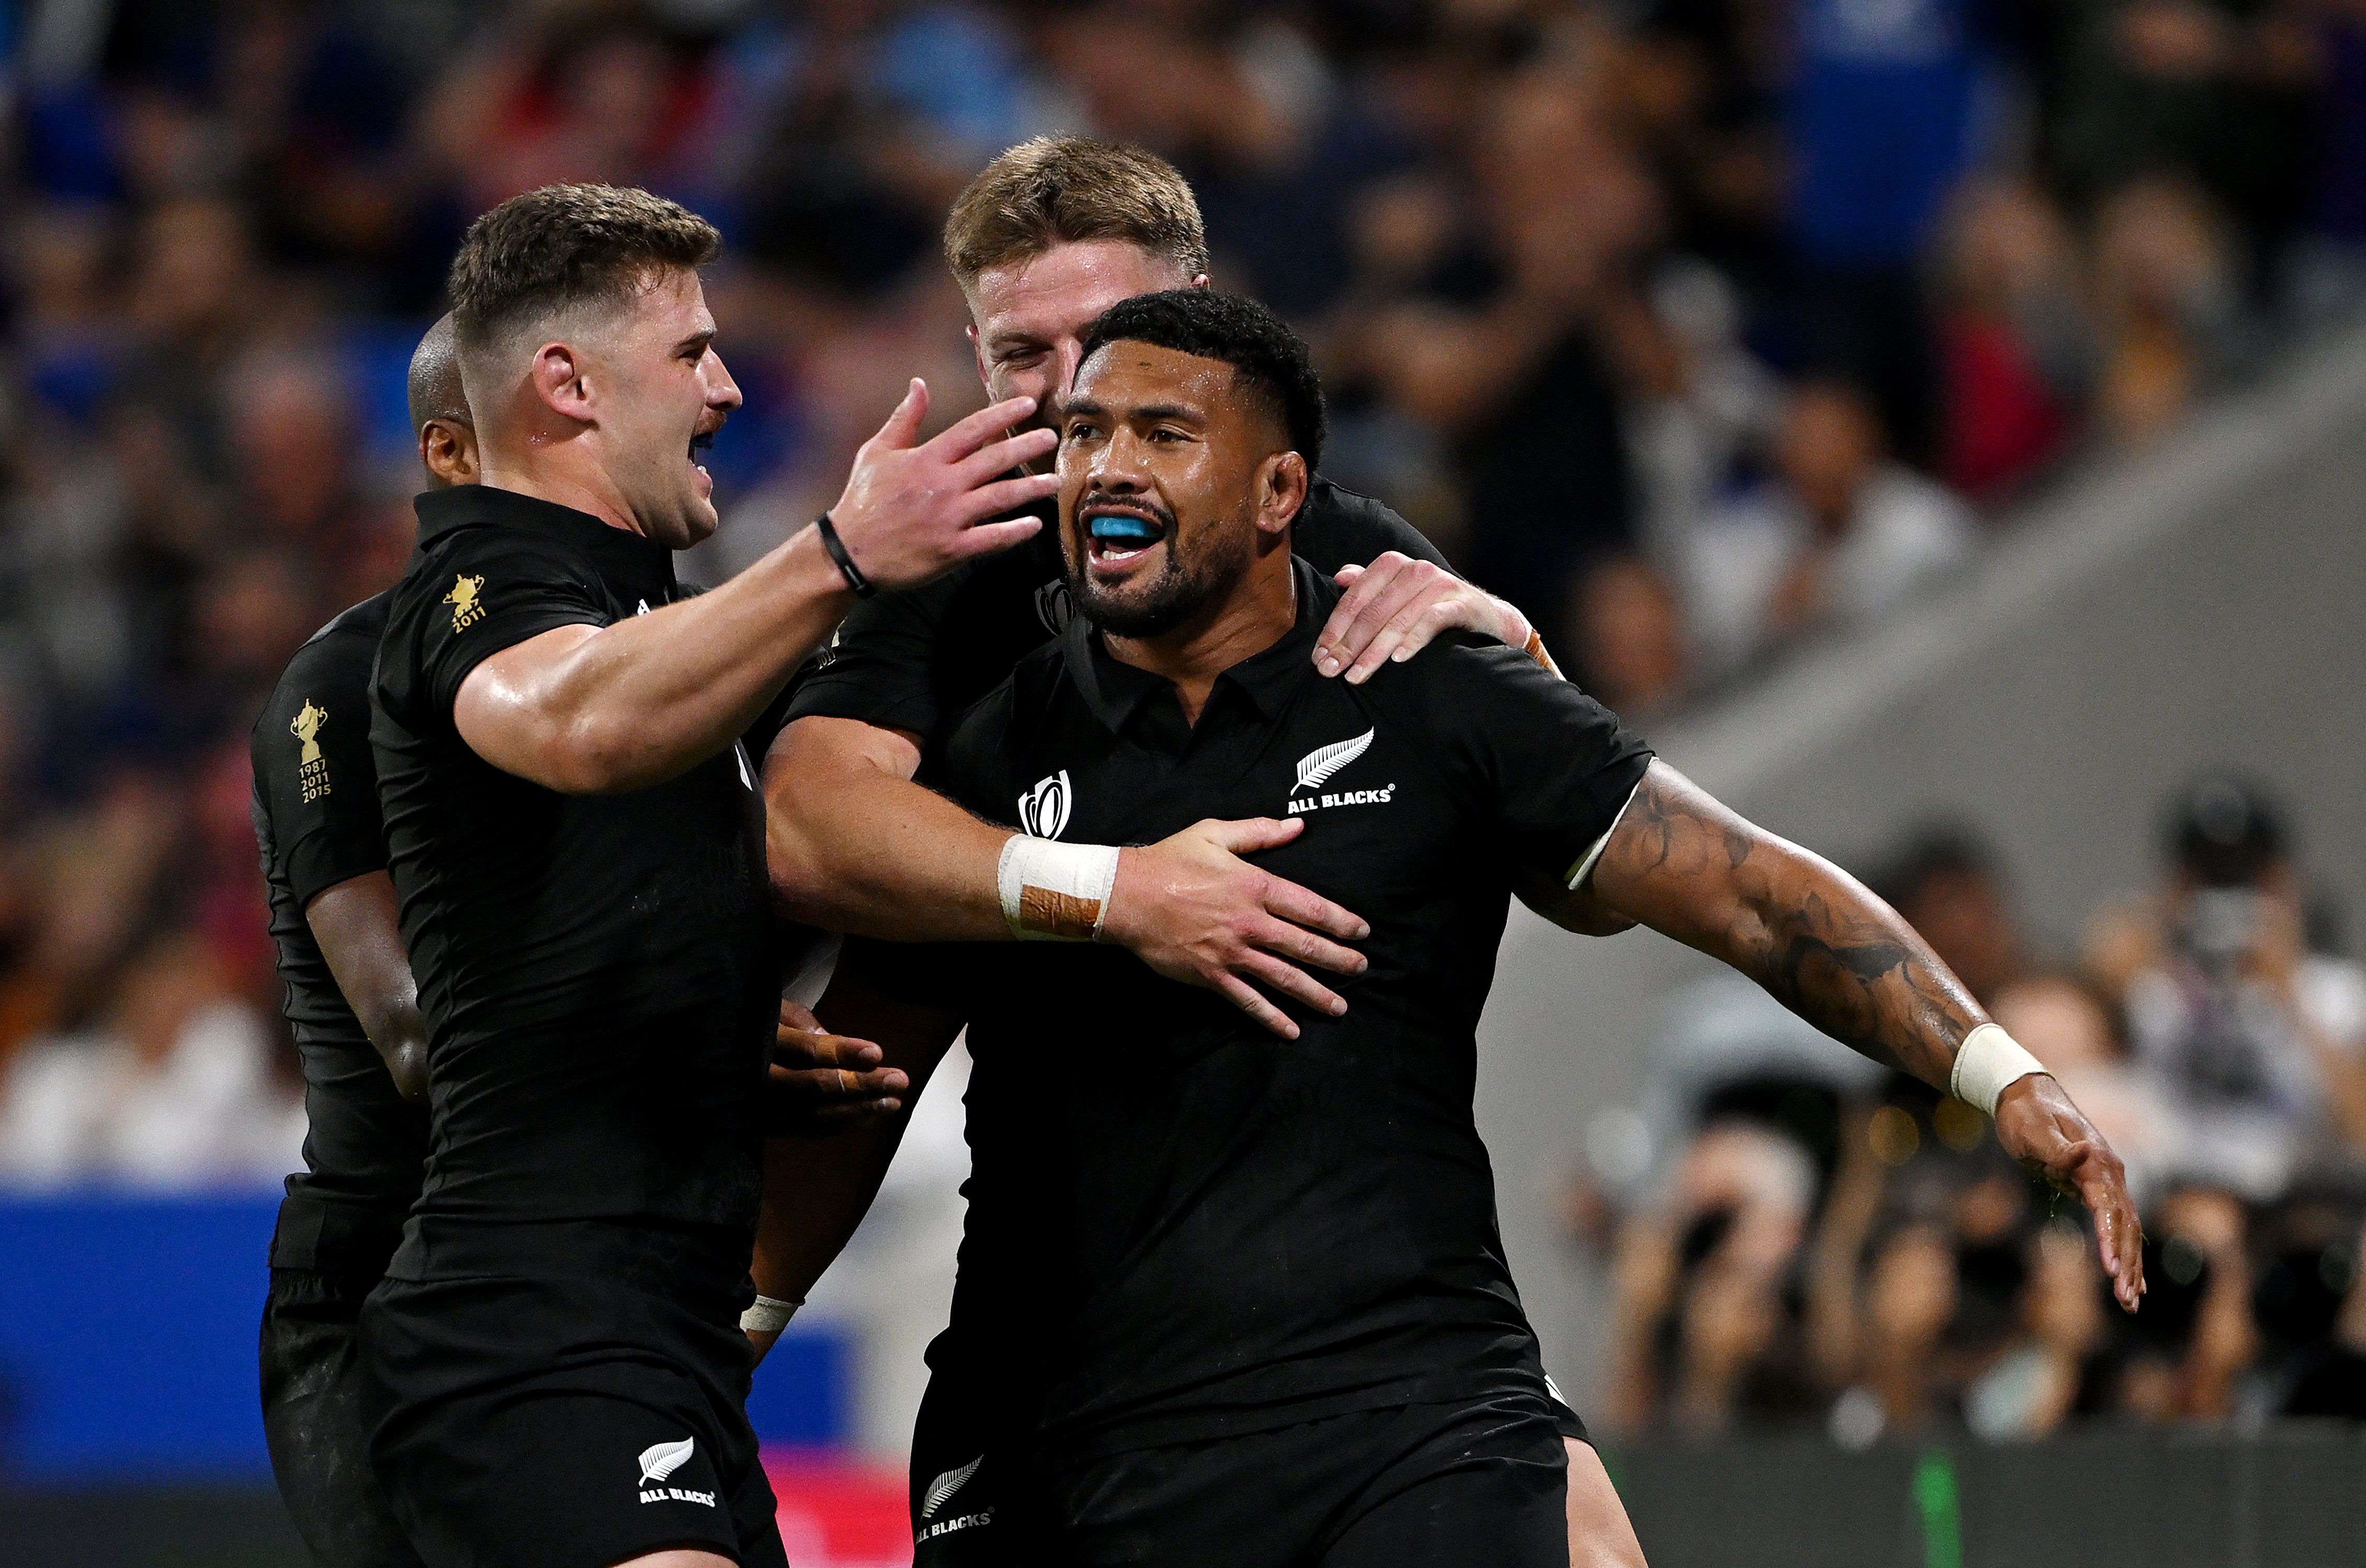 Ardie Savea stood out for New Zealand